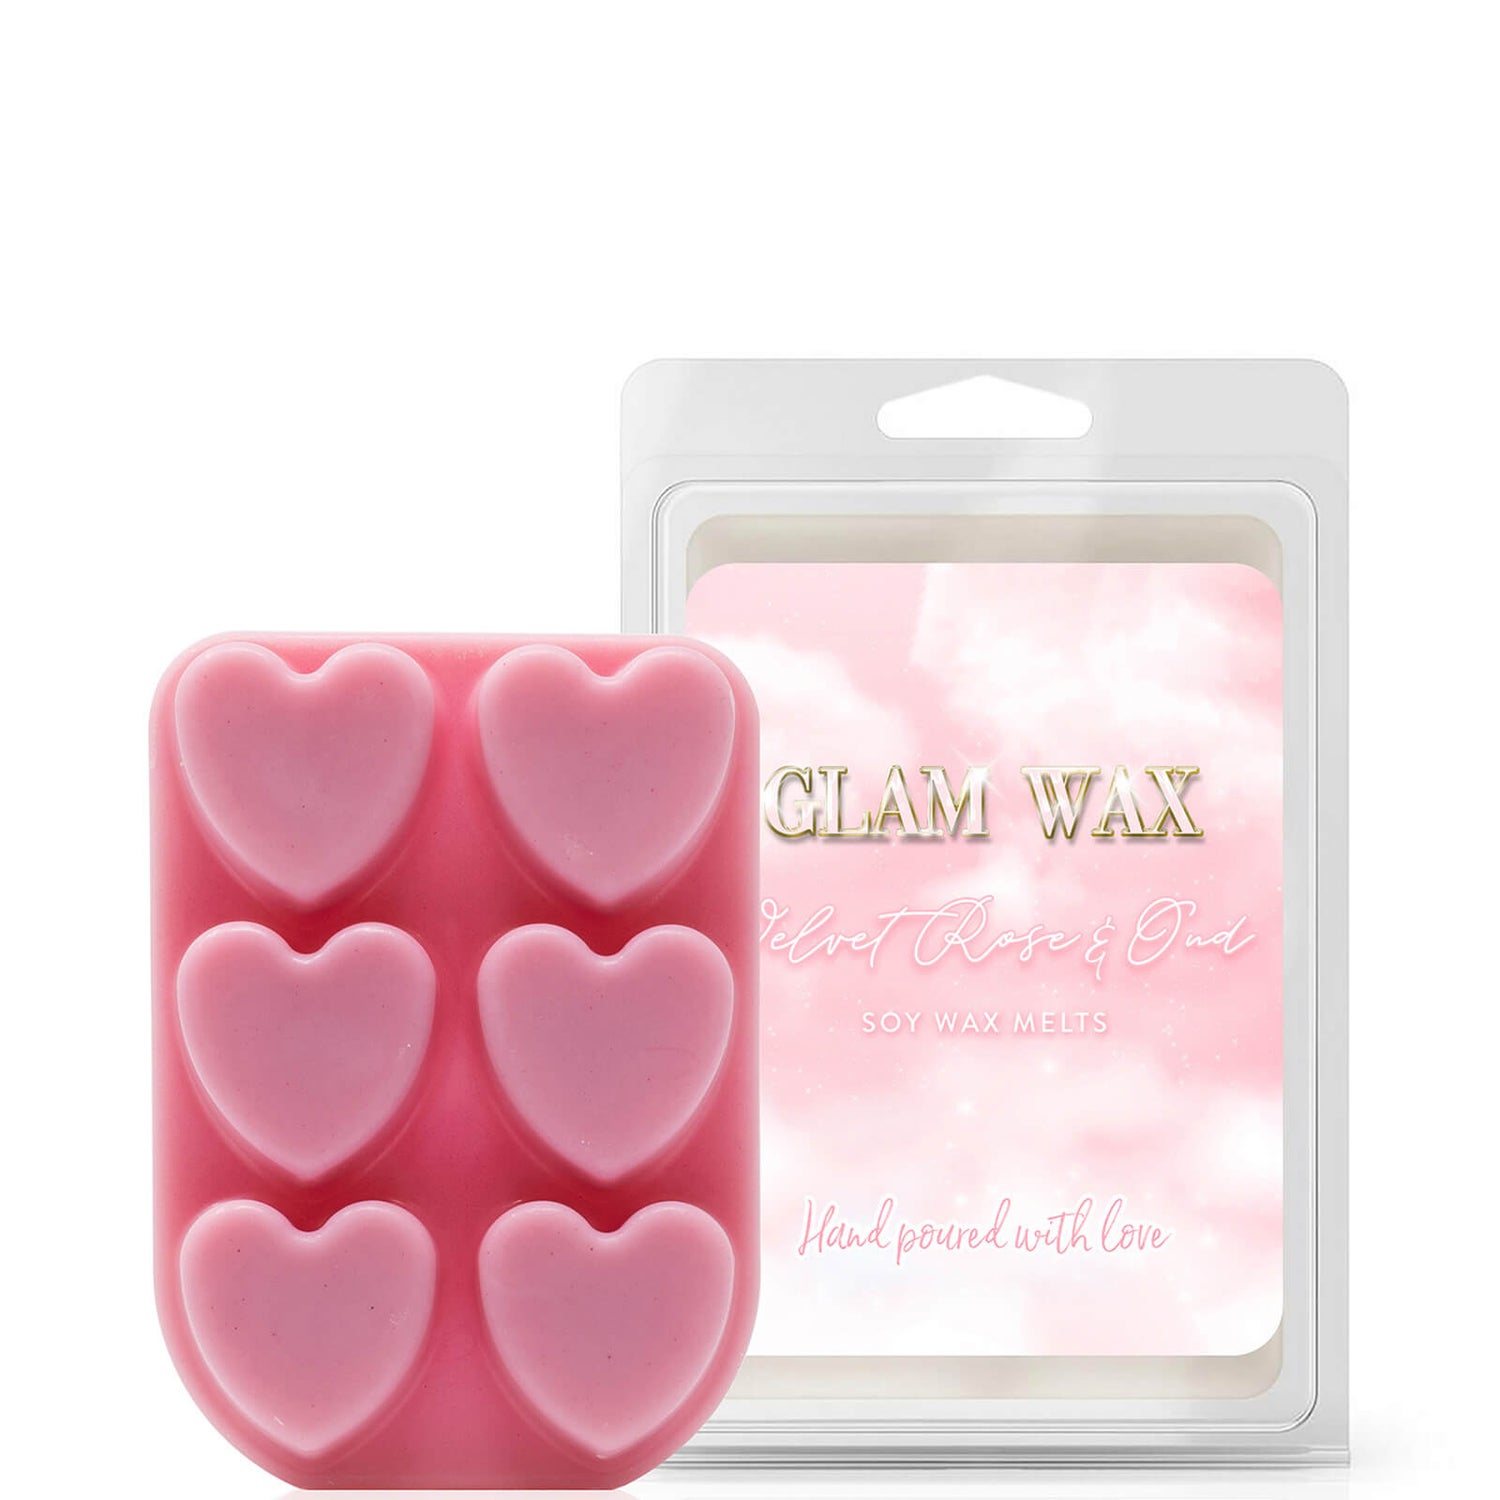 Glam Wax Velvet Rose and Oud Wax Melts 70g